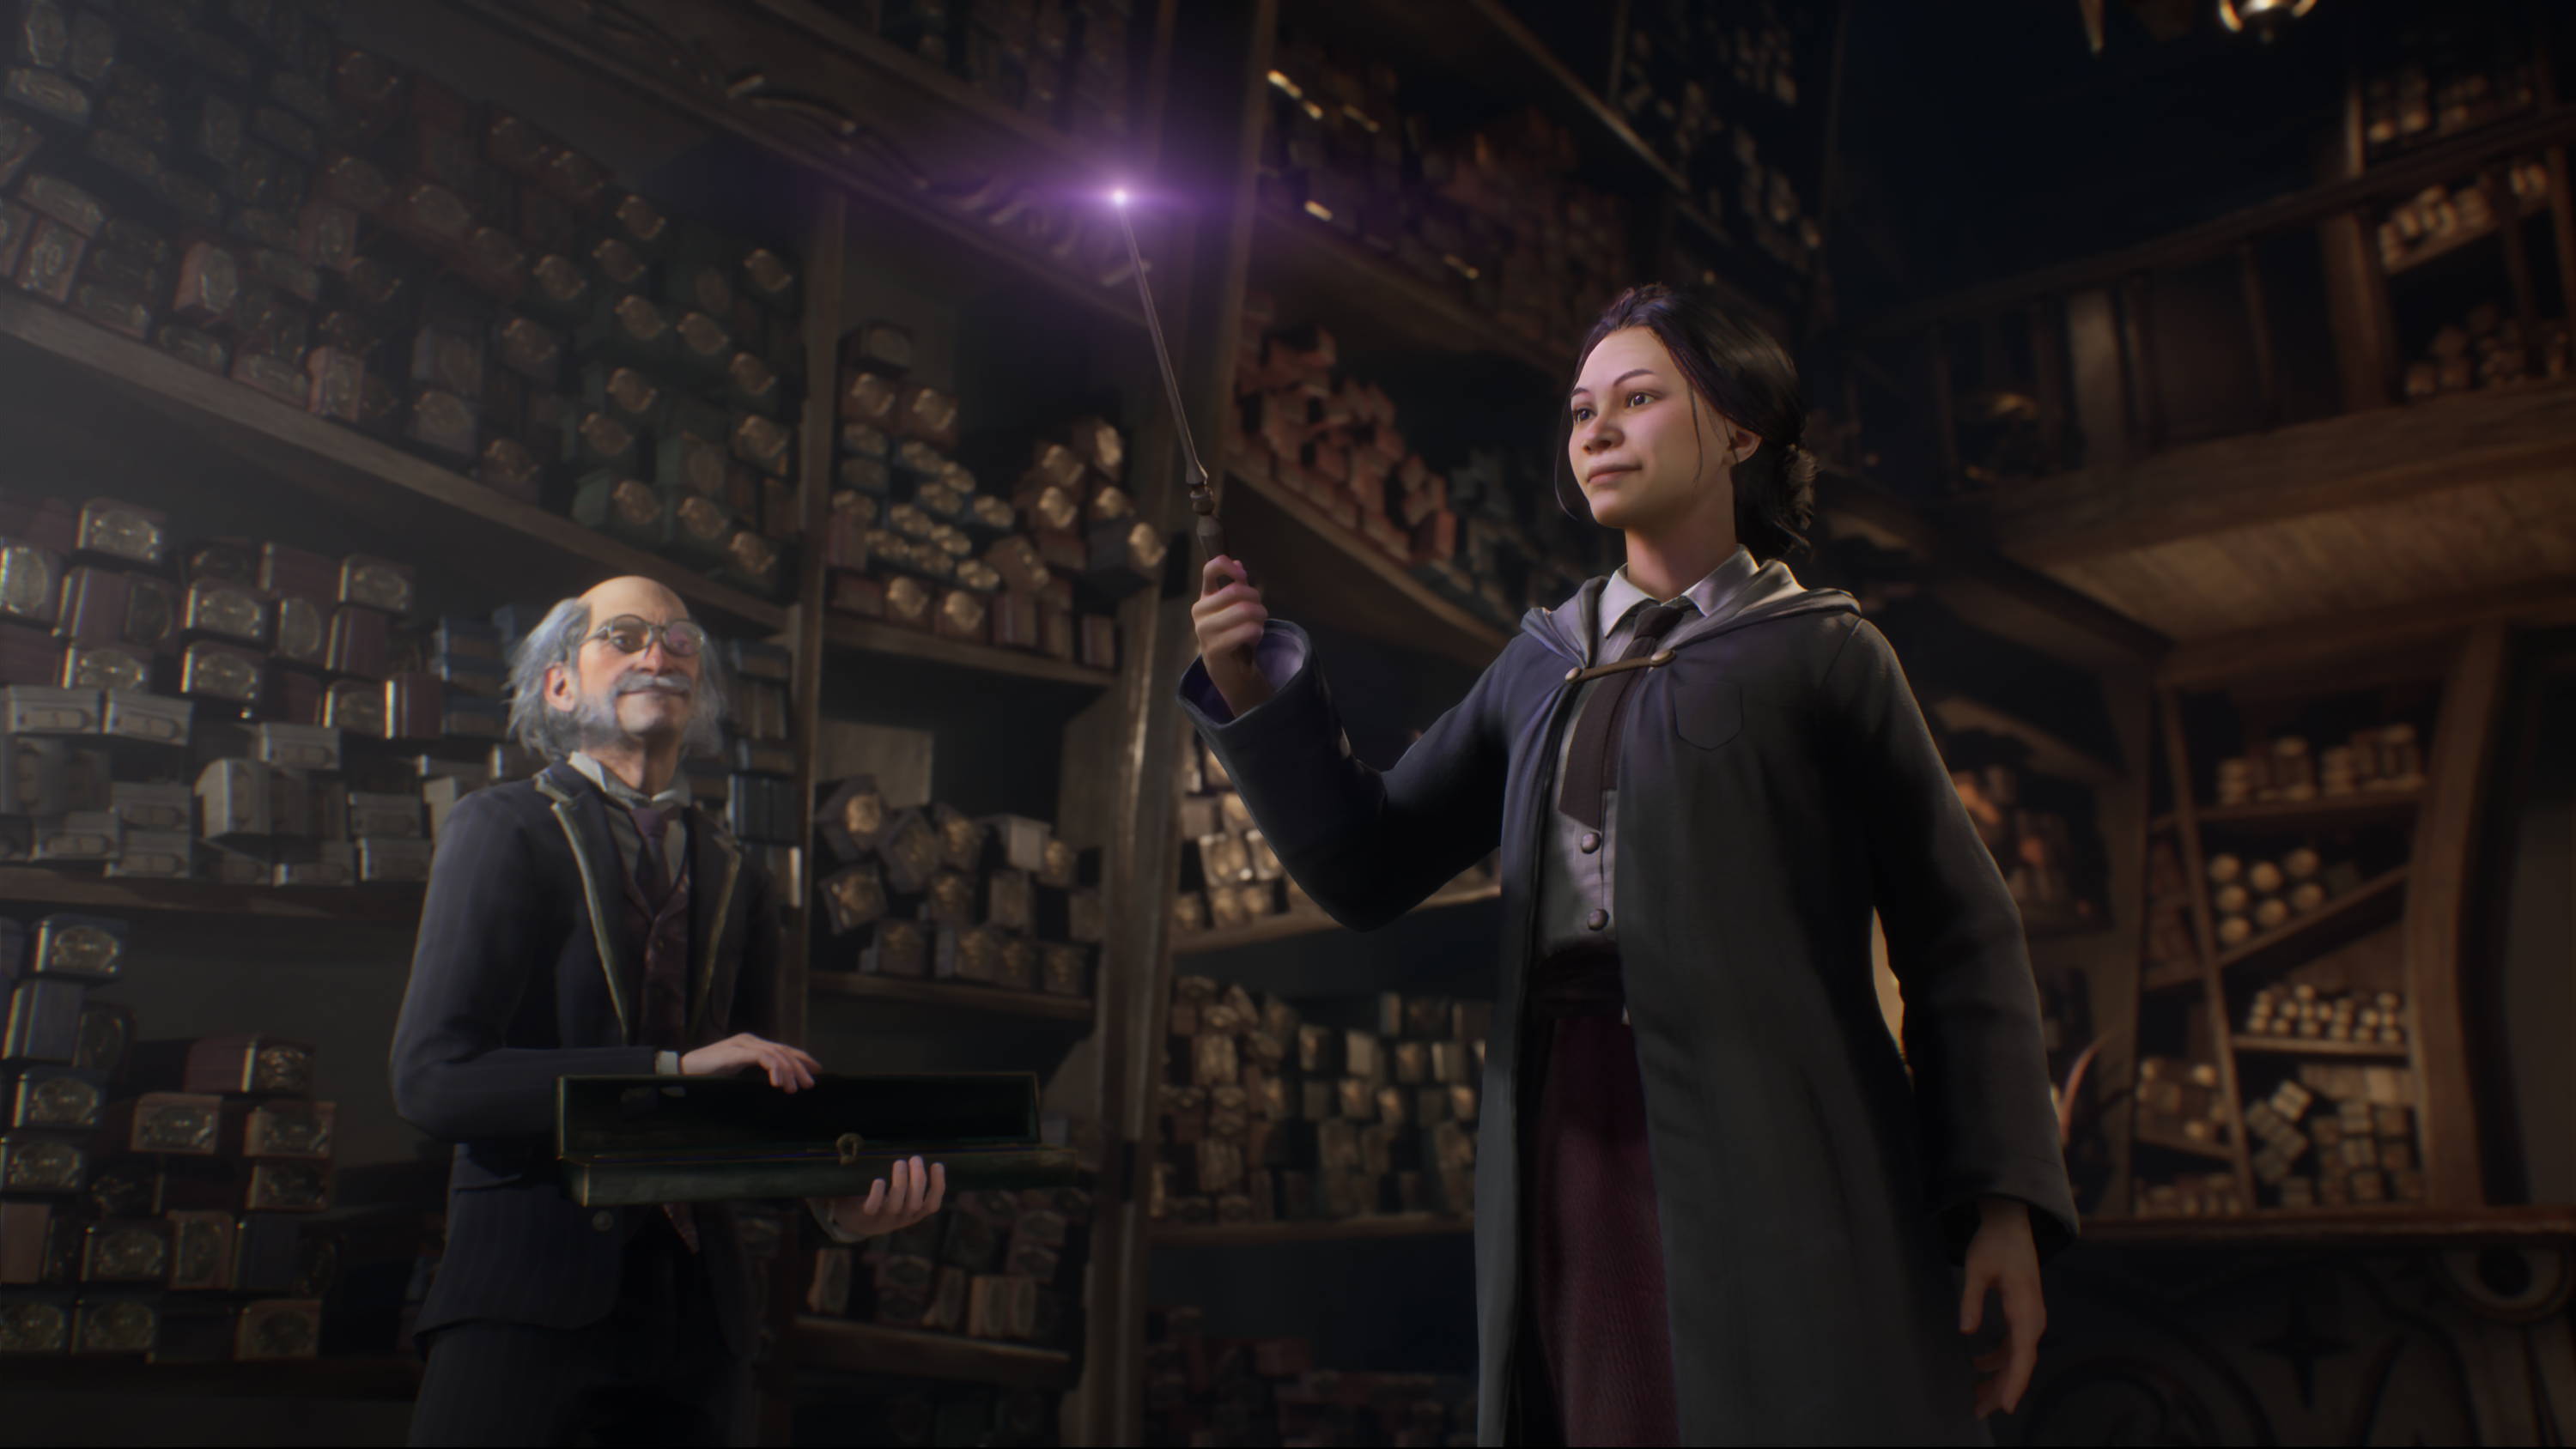 Here's The Exact Time 'Hogwarts Legacy' Early Access Begins On PS5, Xbox  Series X And PC